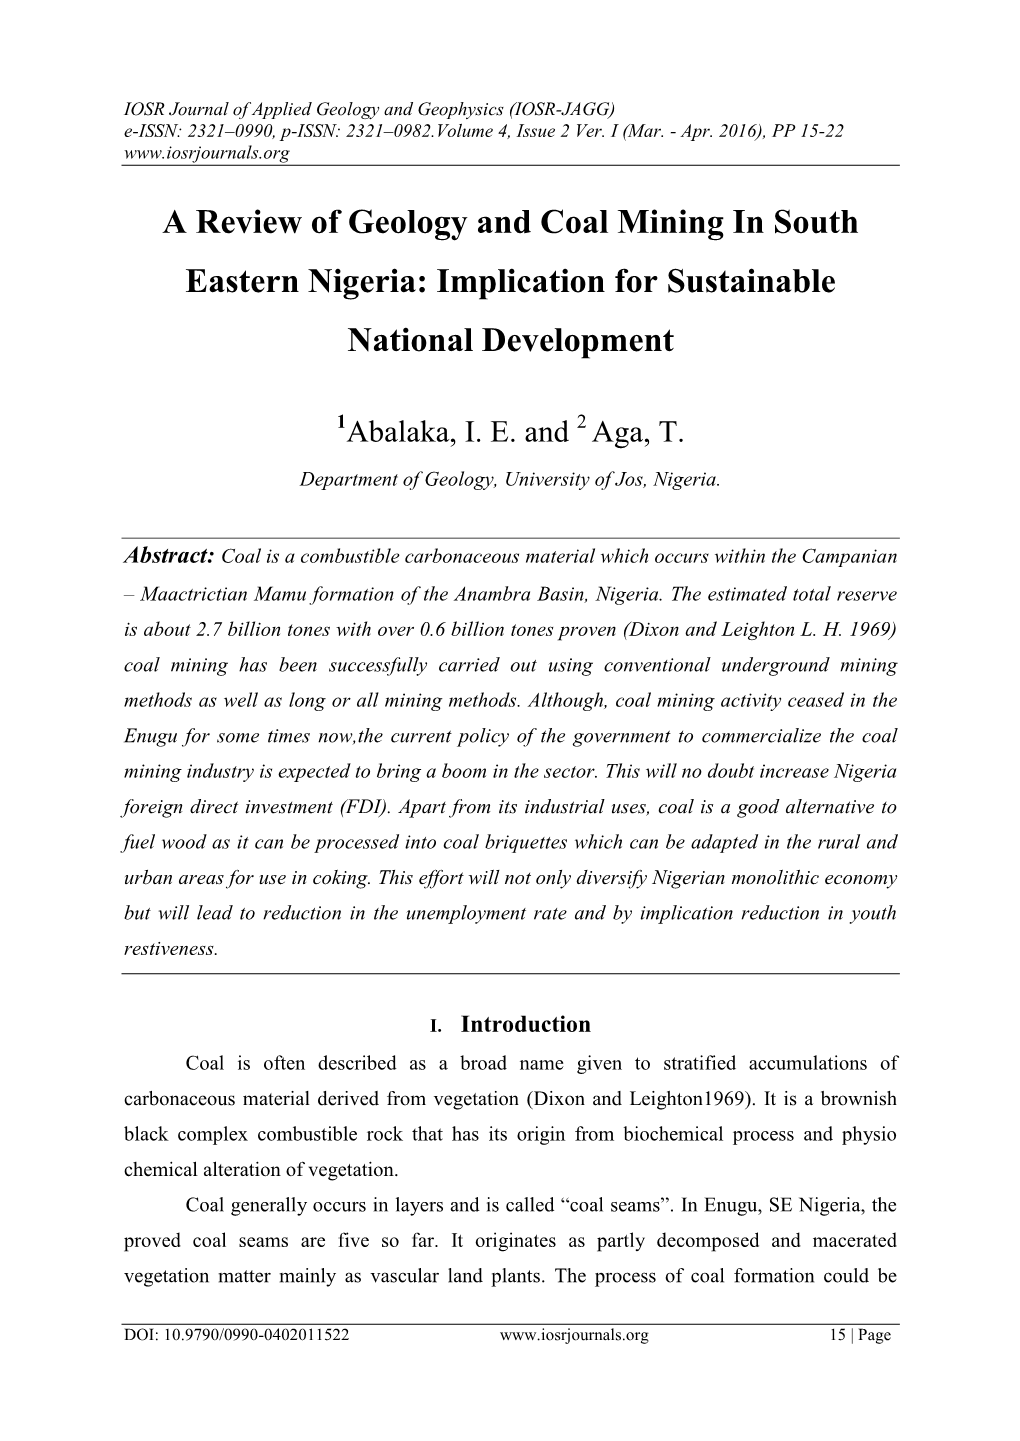 A Review of Geology and Coal Mining in South Eastern Nigeria: Implication for Sustainable National Development